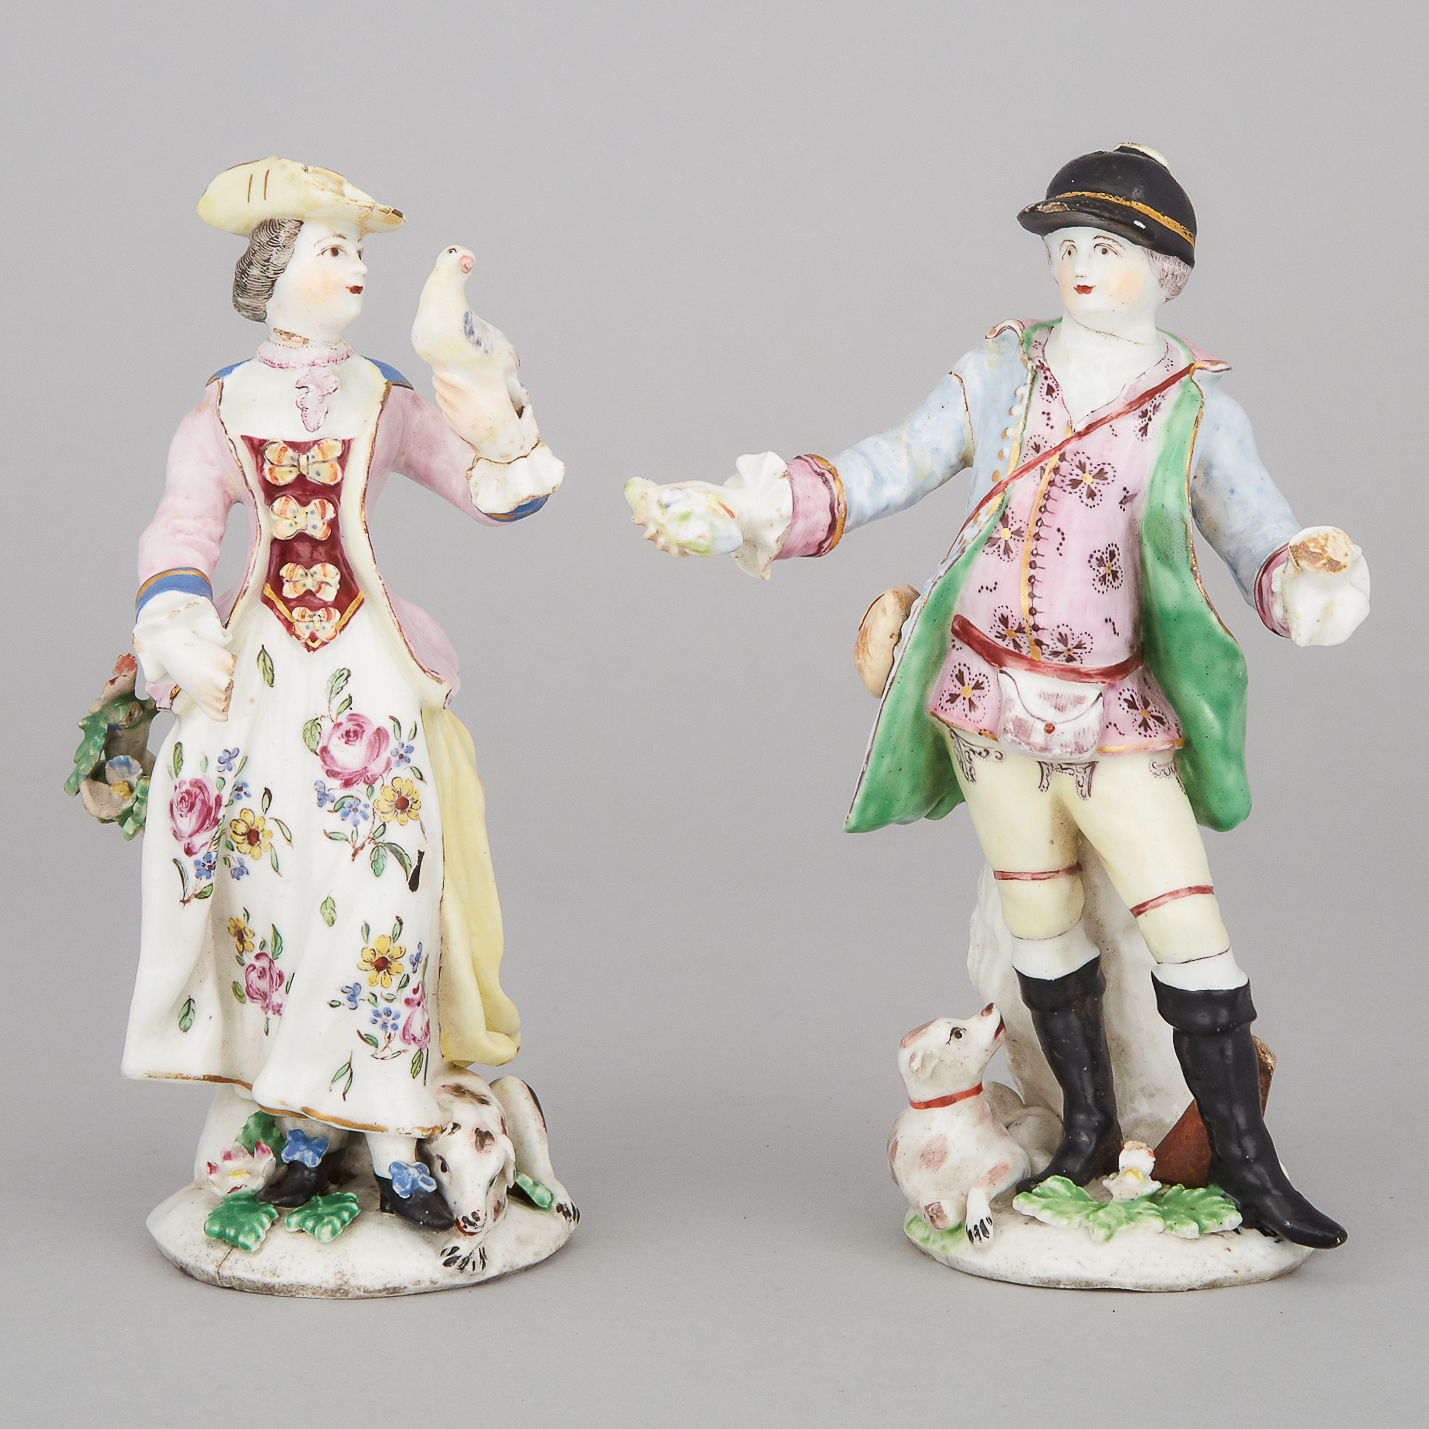 Pair of Bow Figures of a Huntsman and Lady Falconer, c.1755-60